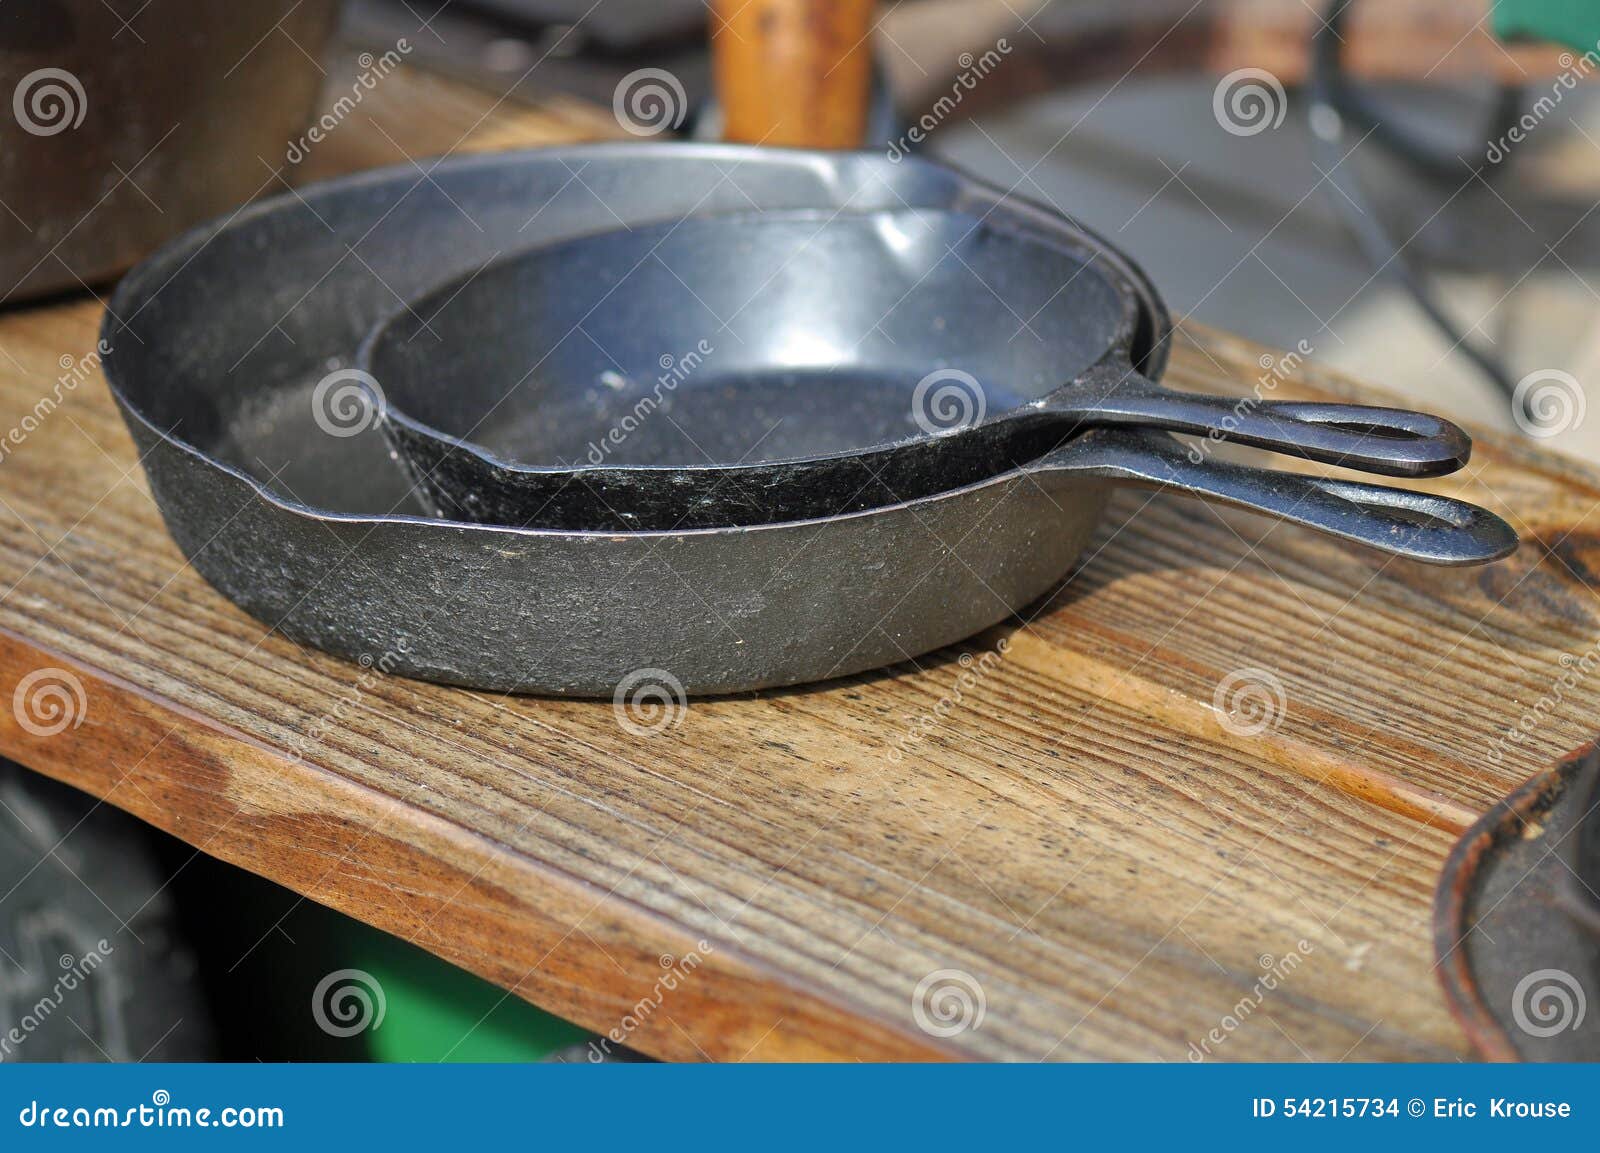 https://thumbs.dreamstime.com/z/cast-iron-pans-vintage-pots-display-state-fair-grounds-raleigh-54215734.jpg